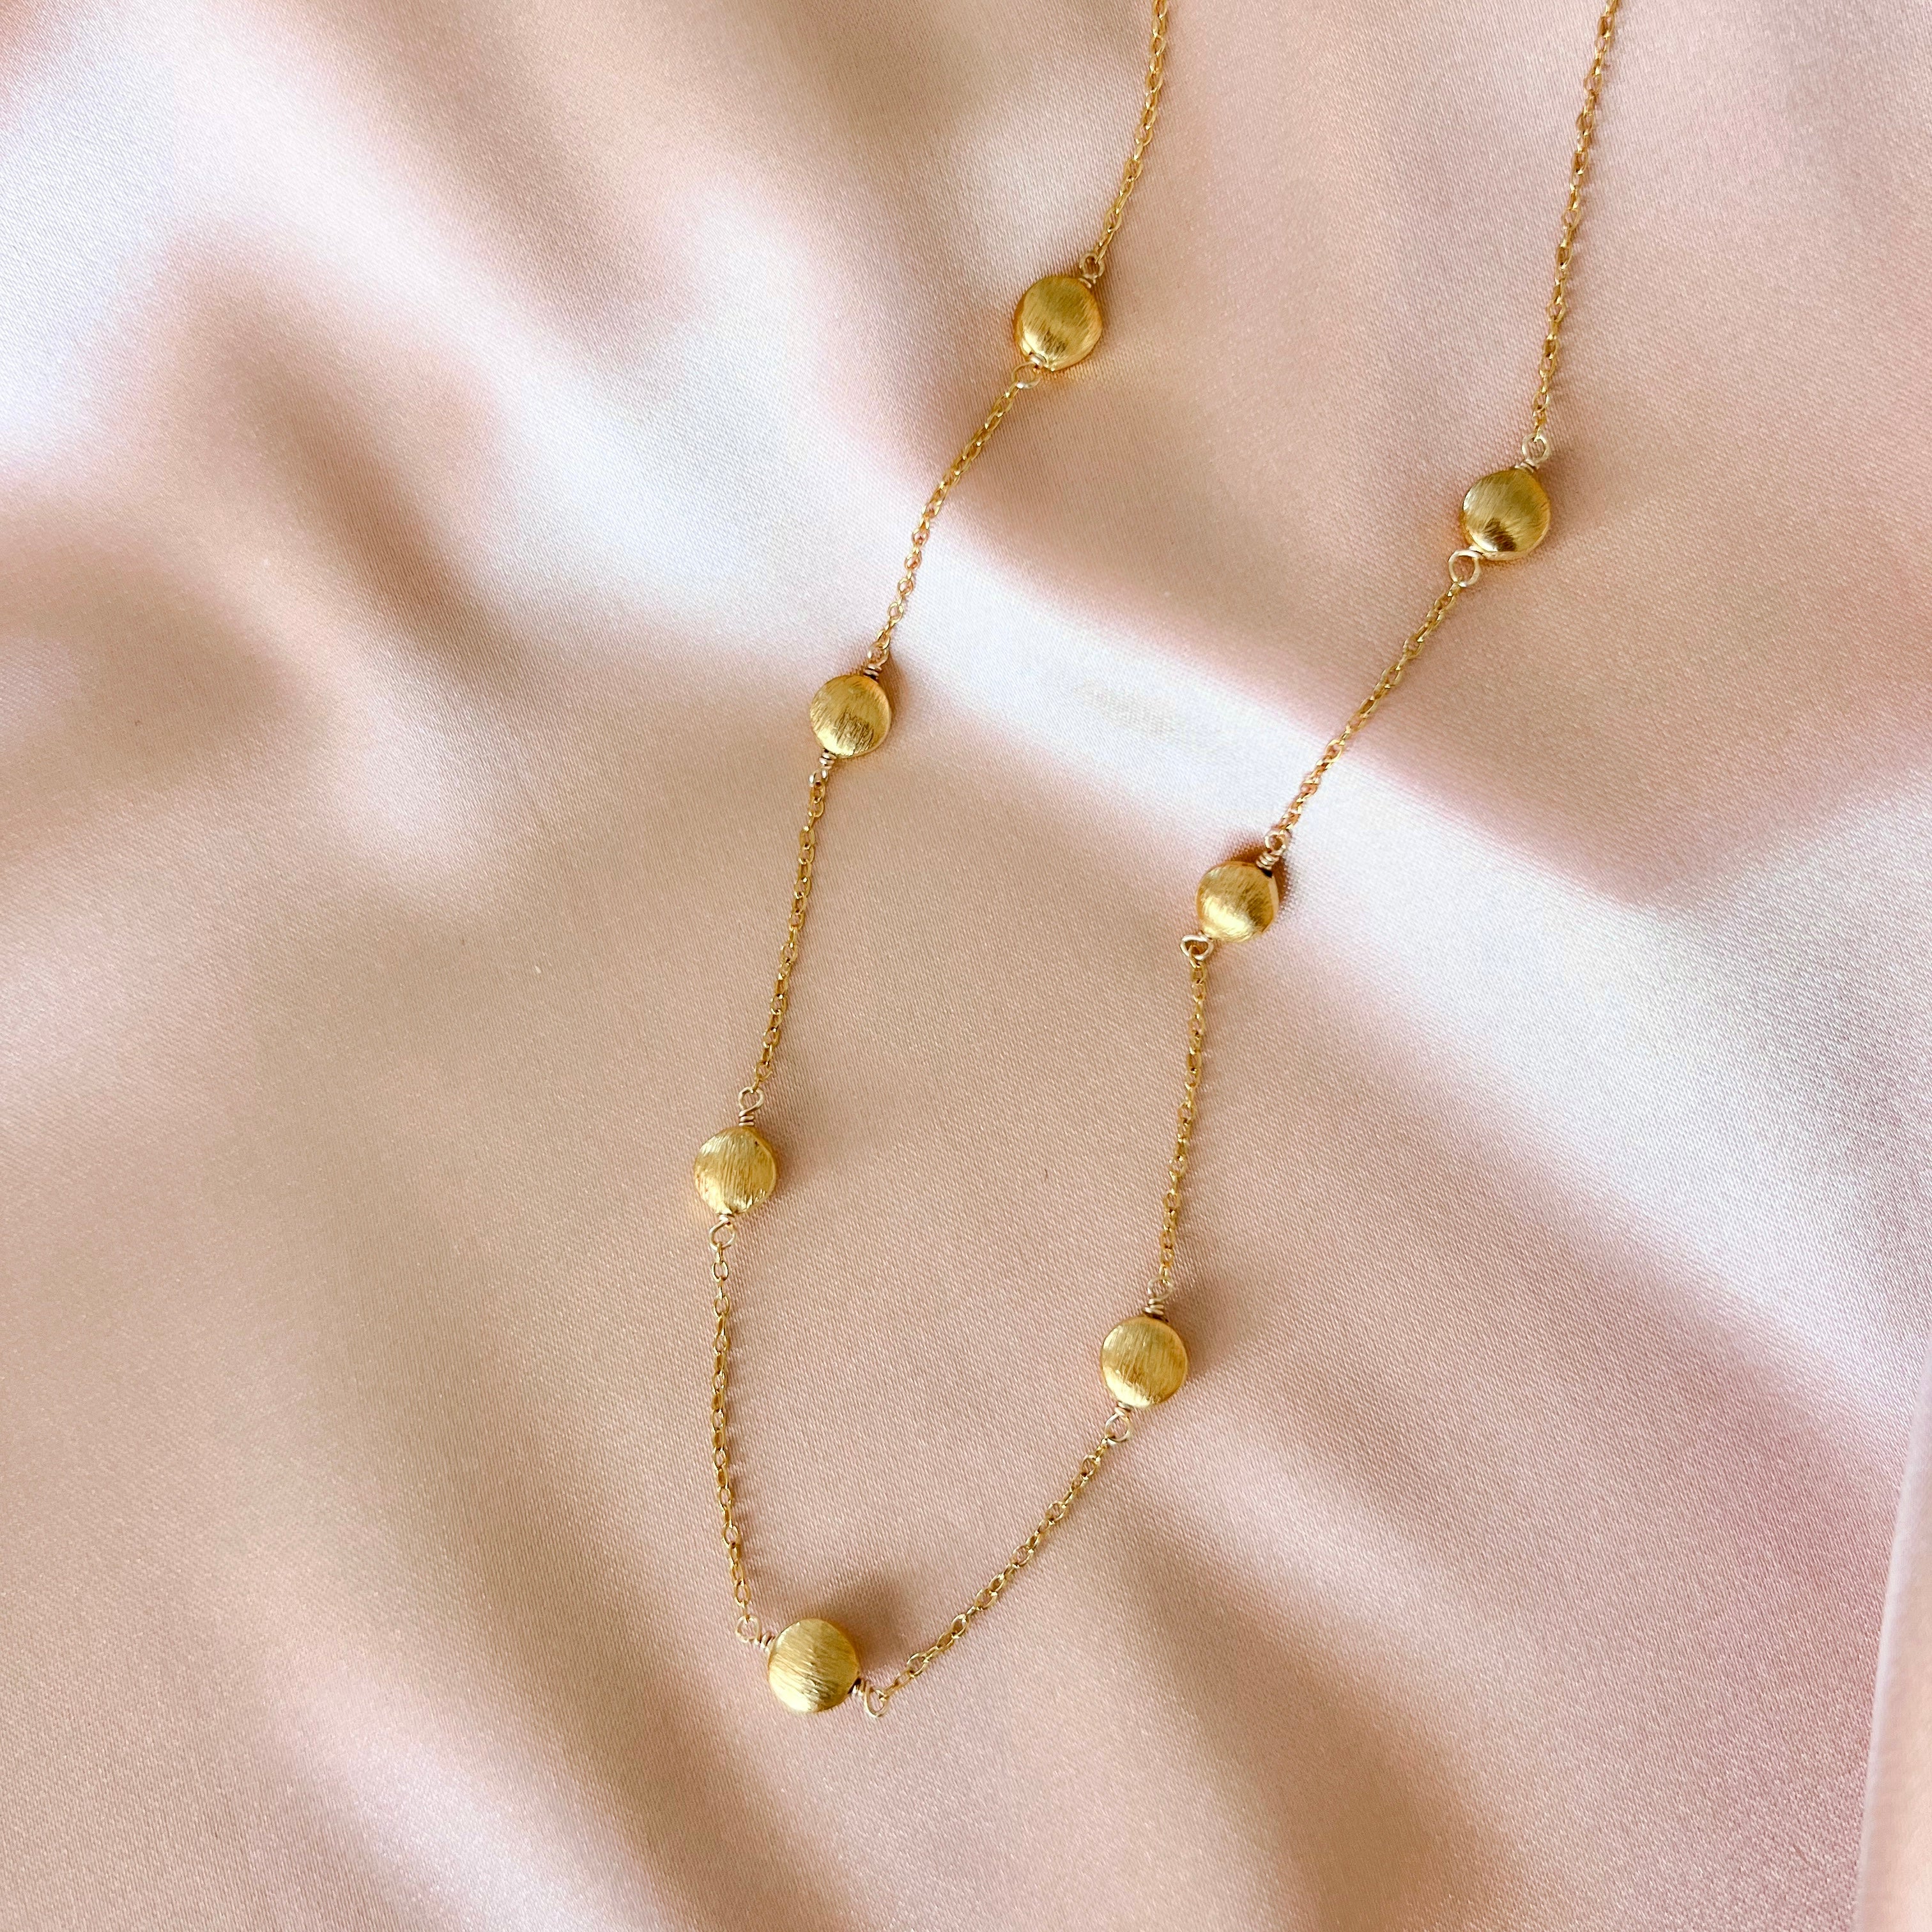 Expertly Handmade Gold Station Necklace, Adjustable from 16"-18"